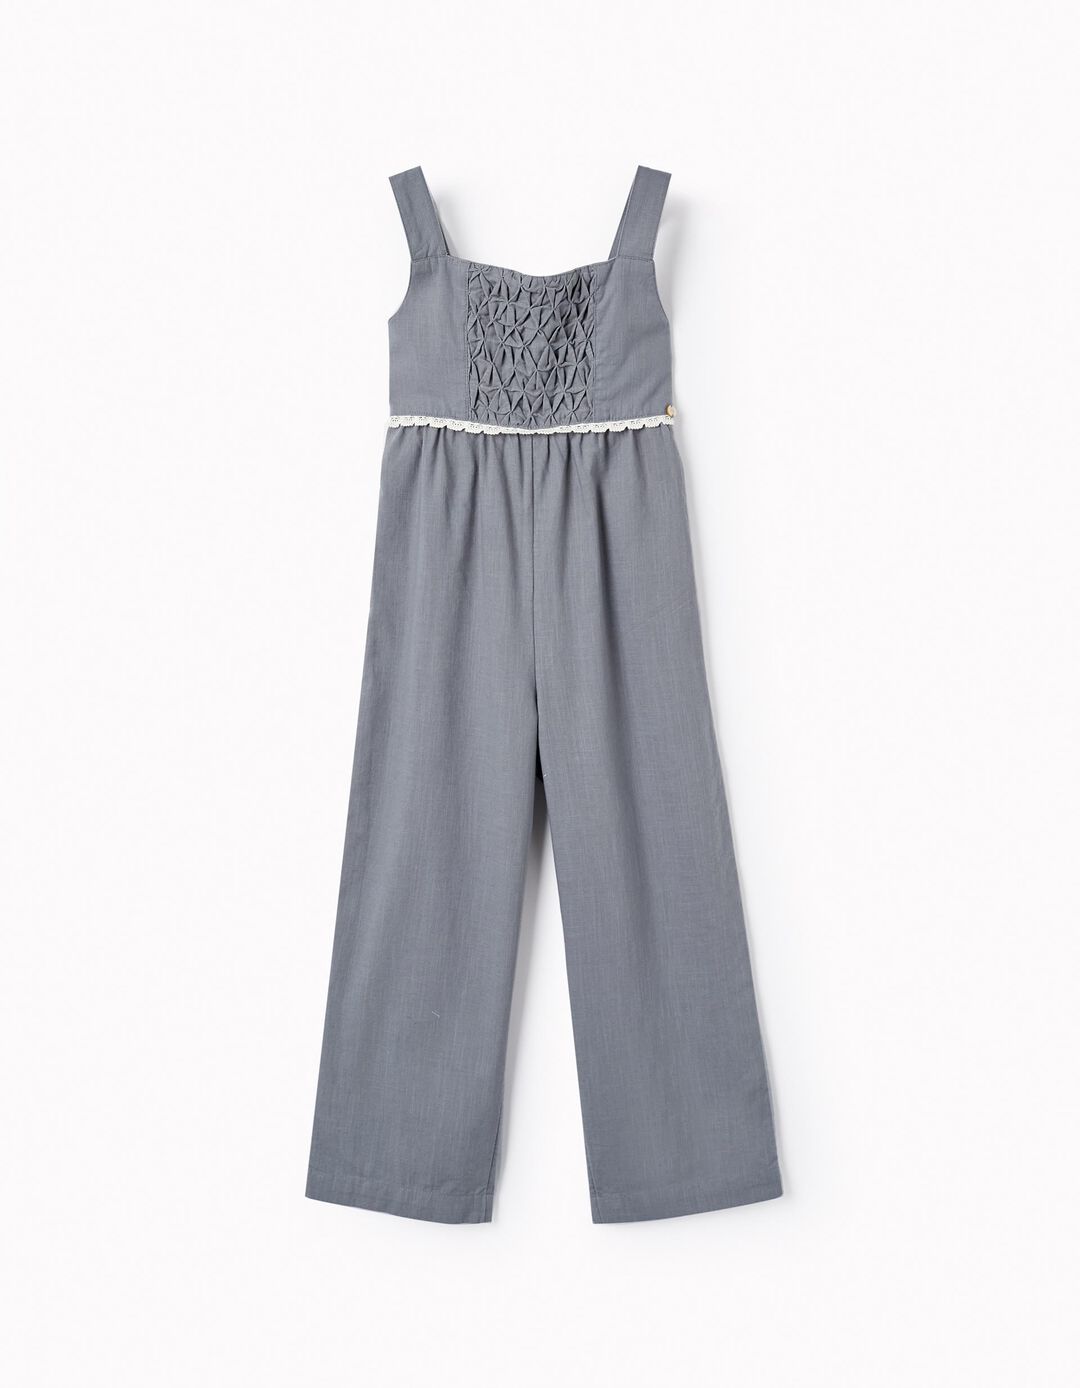 Cotton Jumpsuit with Lace for Girls, Blue